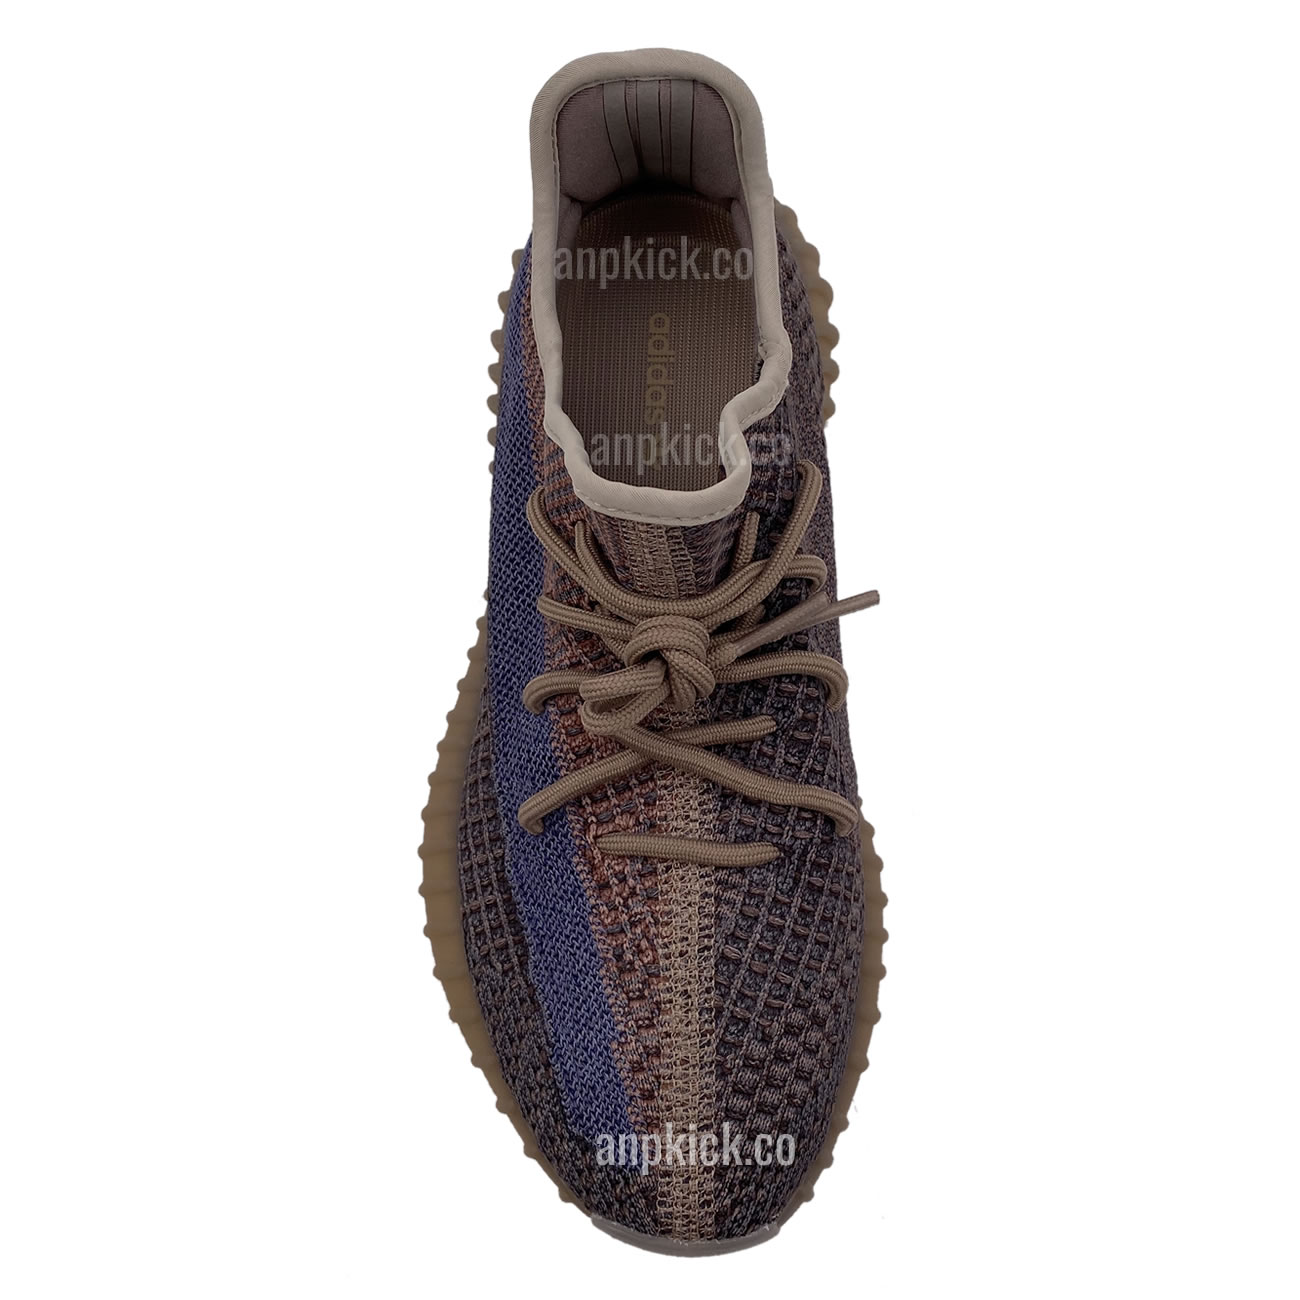 Adidas Yeezy Boost 350 V2 Yecher Ho2795 New Release Date First Look (9) - newkick.org